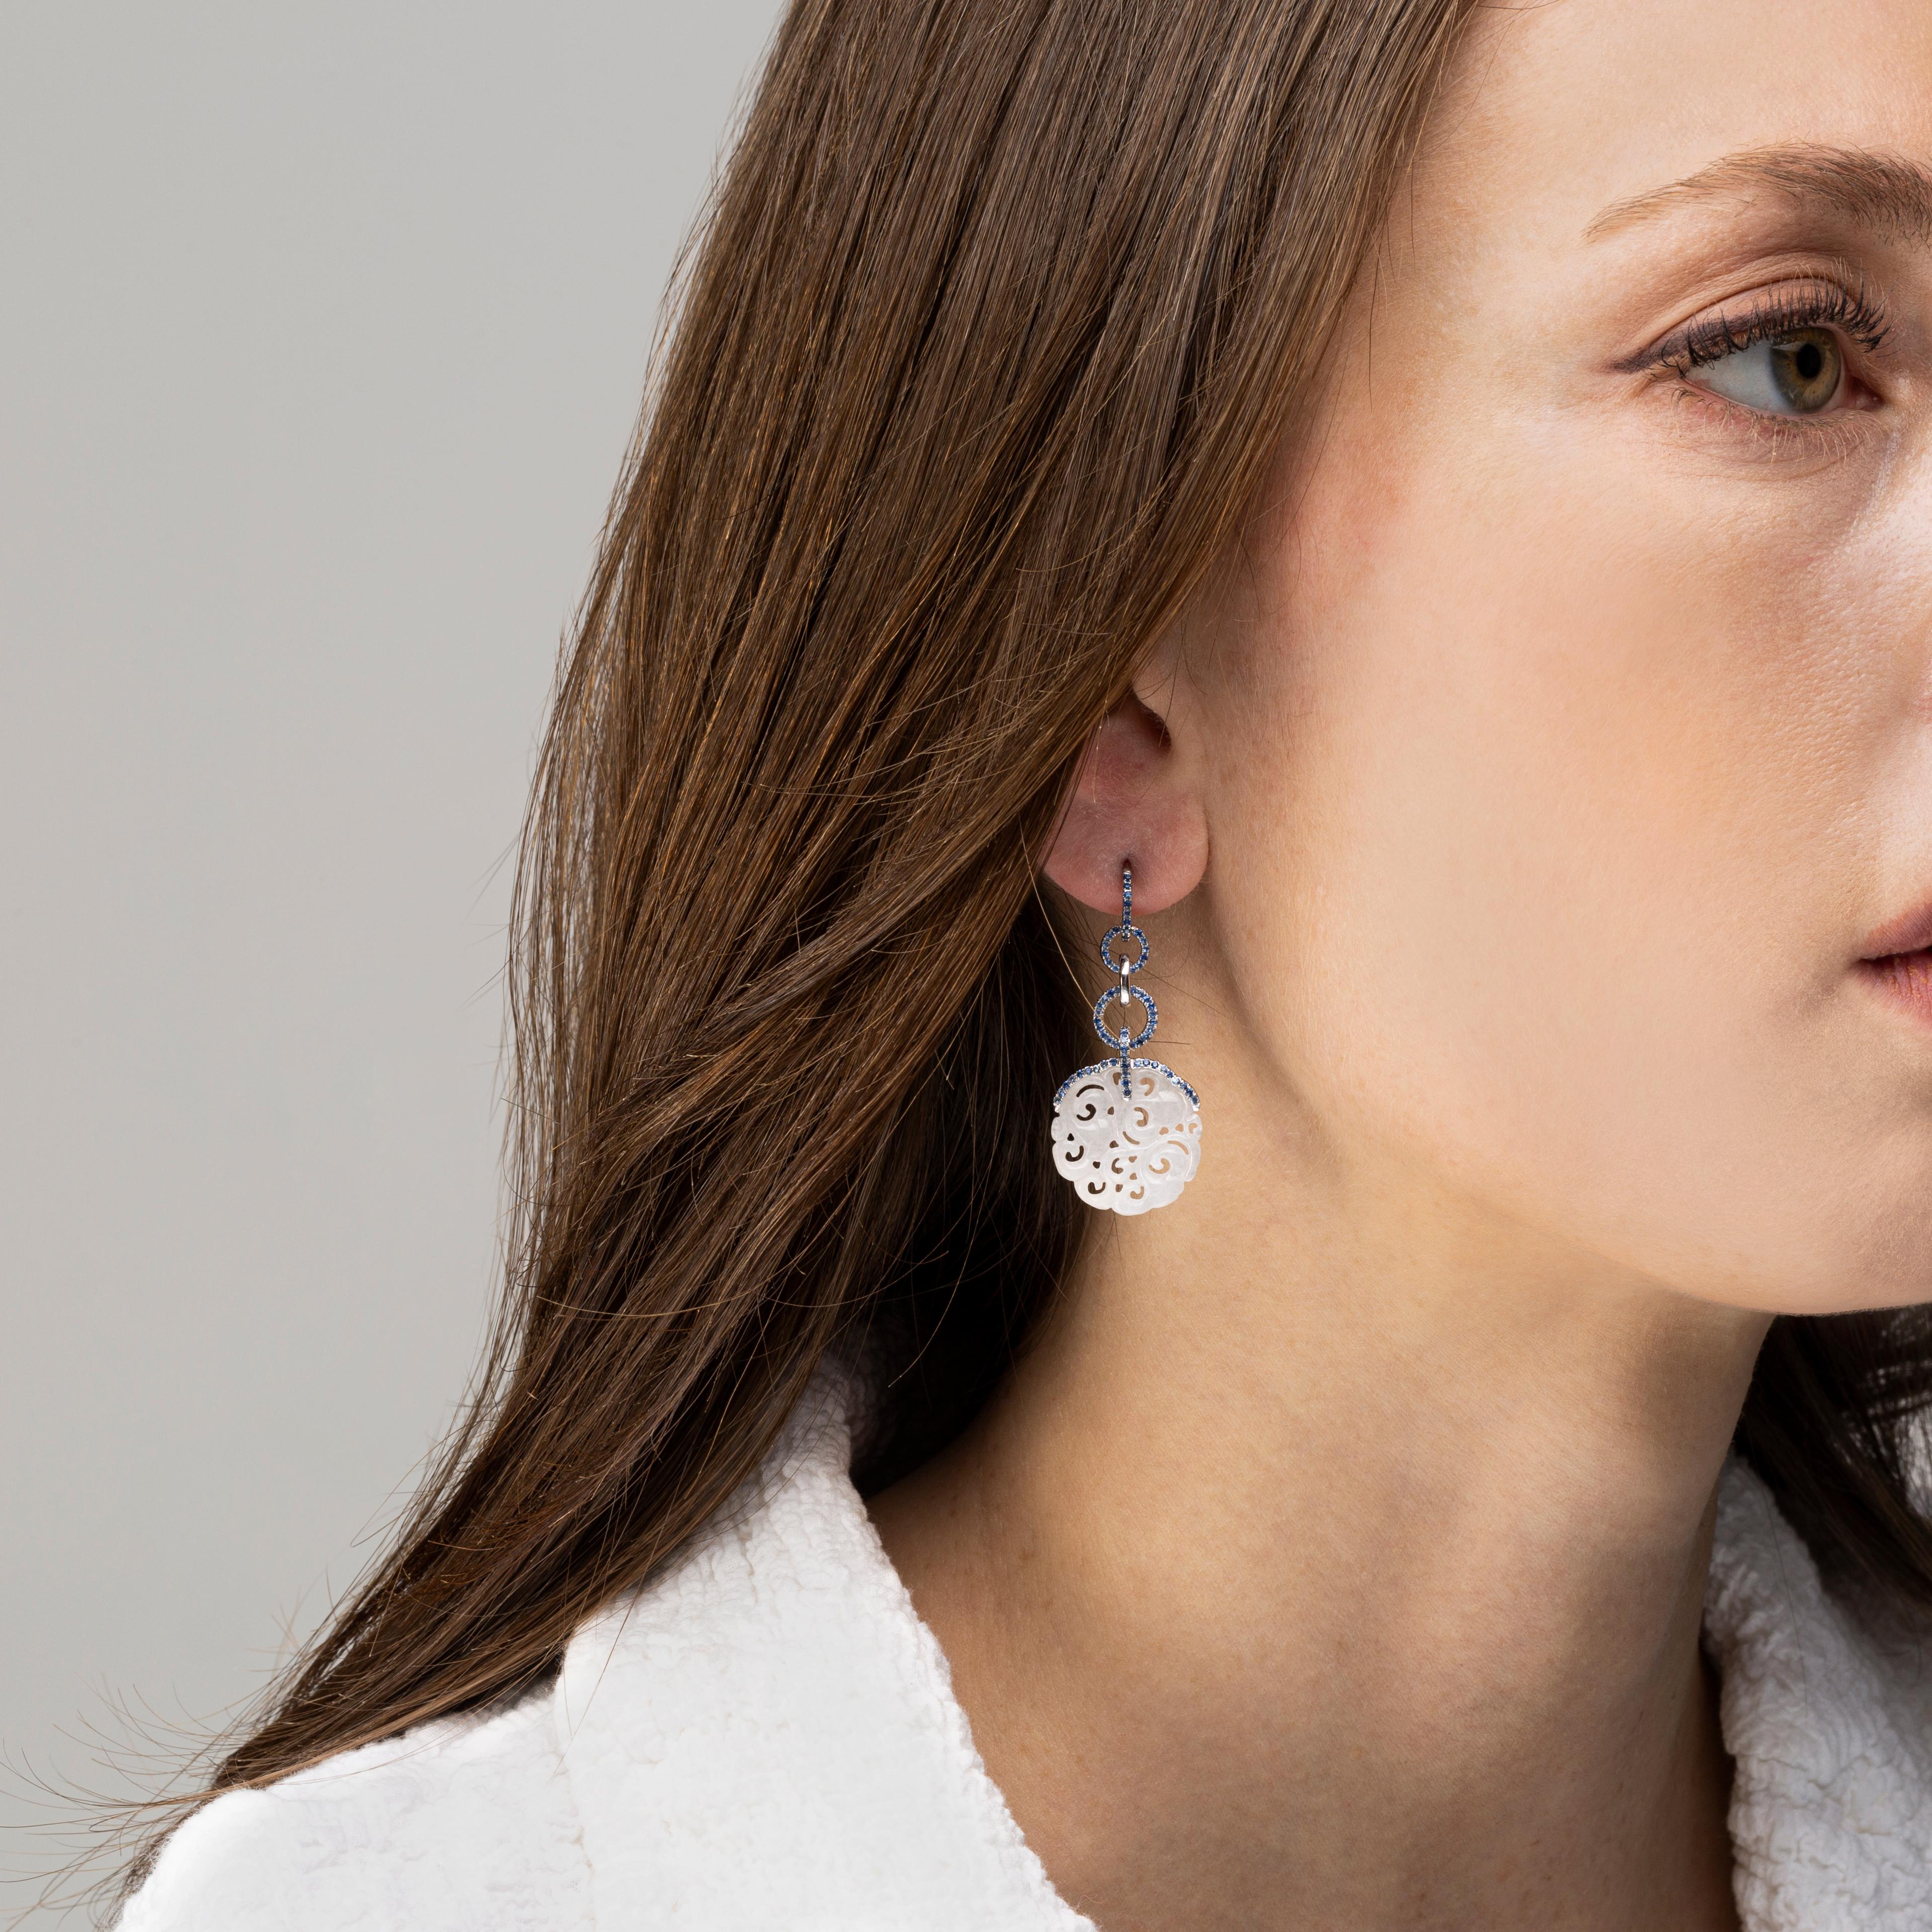 Alex Jona design collection, hand crafted in Italy, drop earrings featuring two carved white jades weighing in total 11.98 carats, set on 18k white gold adorned by 0.86 carats of light blue sapphires.
Dimensions: H 1.56in/39mm, W 0.75in/19mm, D